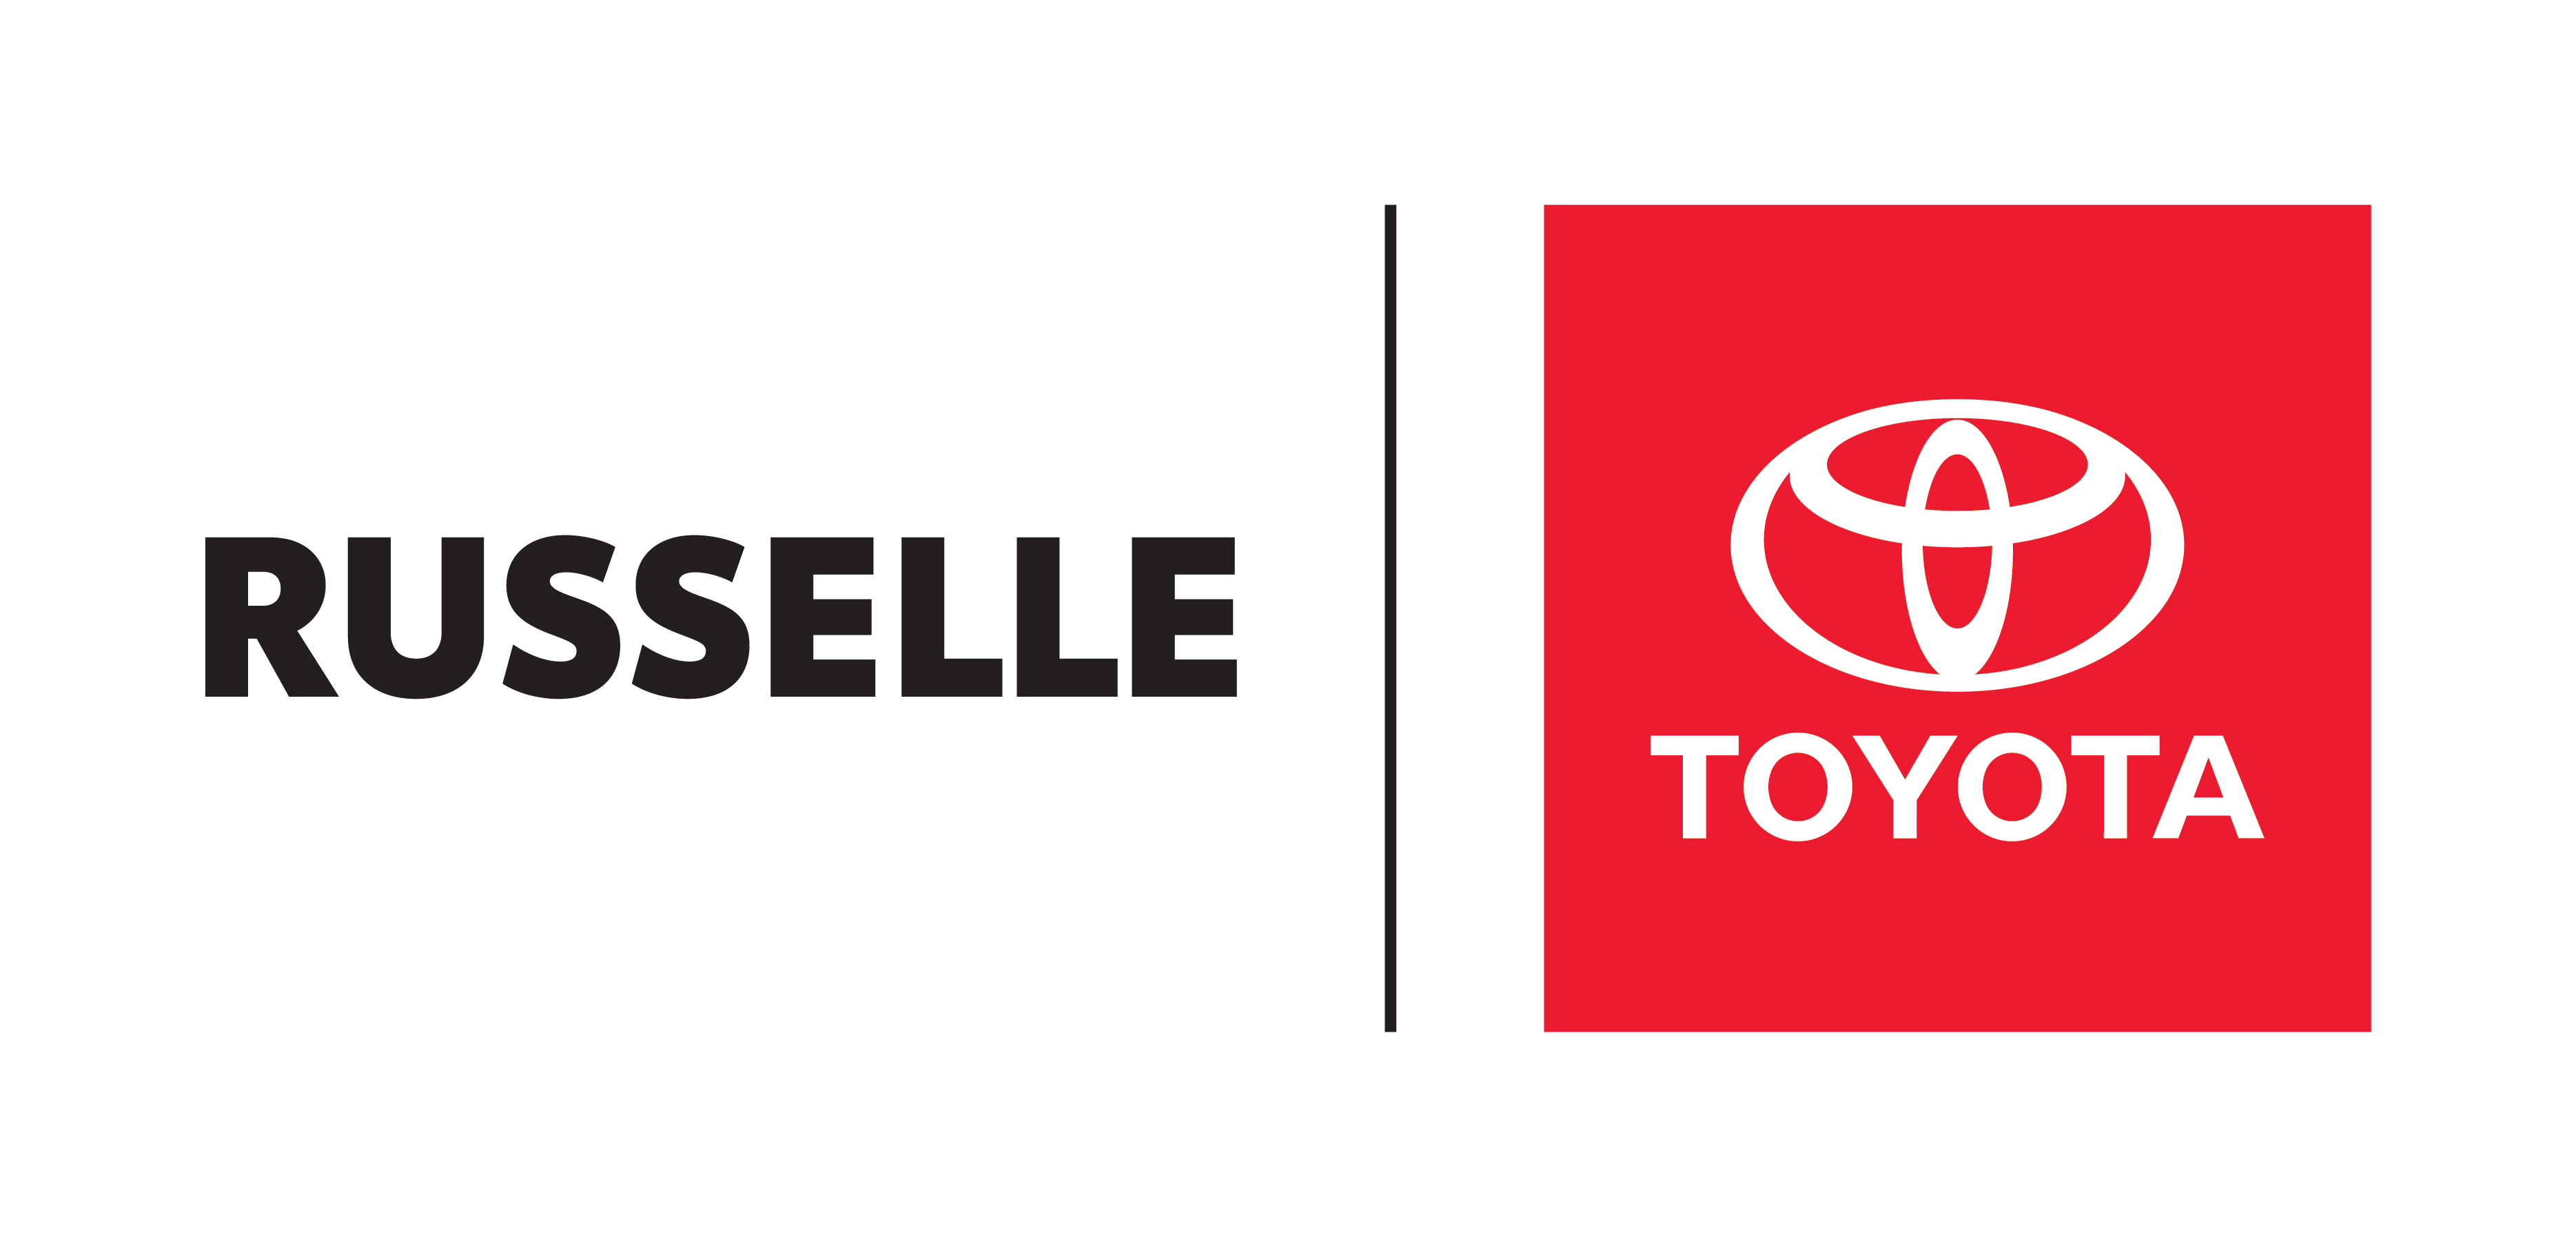 Russelle_Toyota_4COLOUR.png